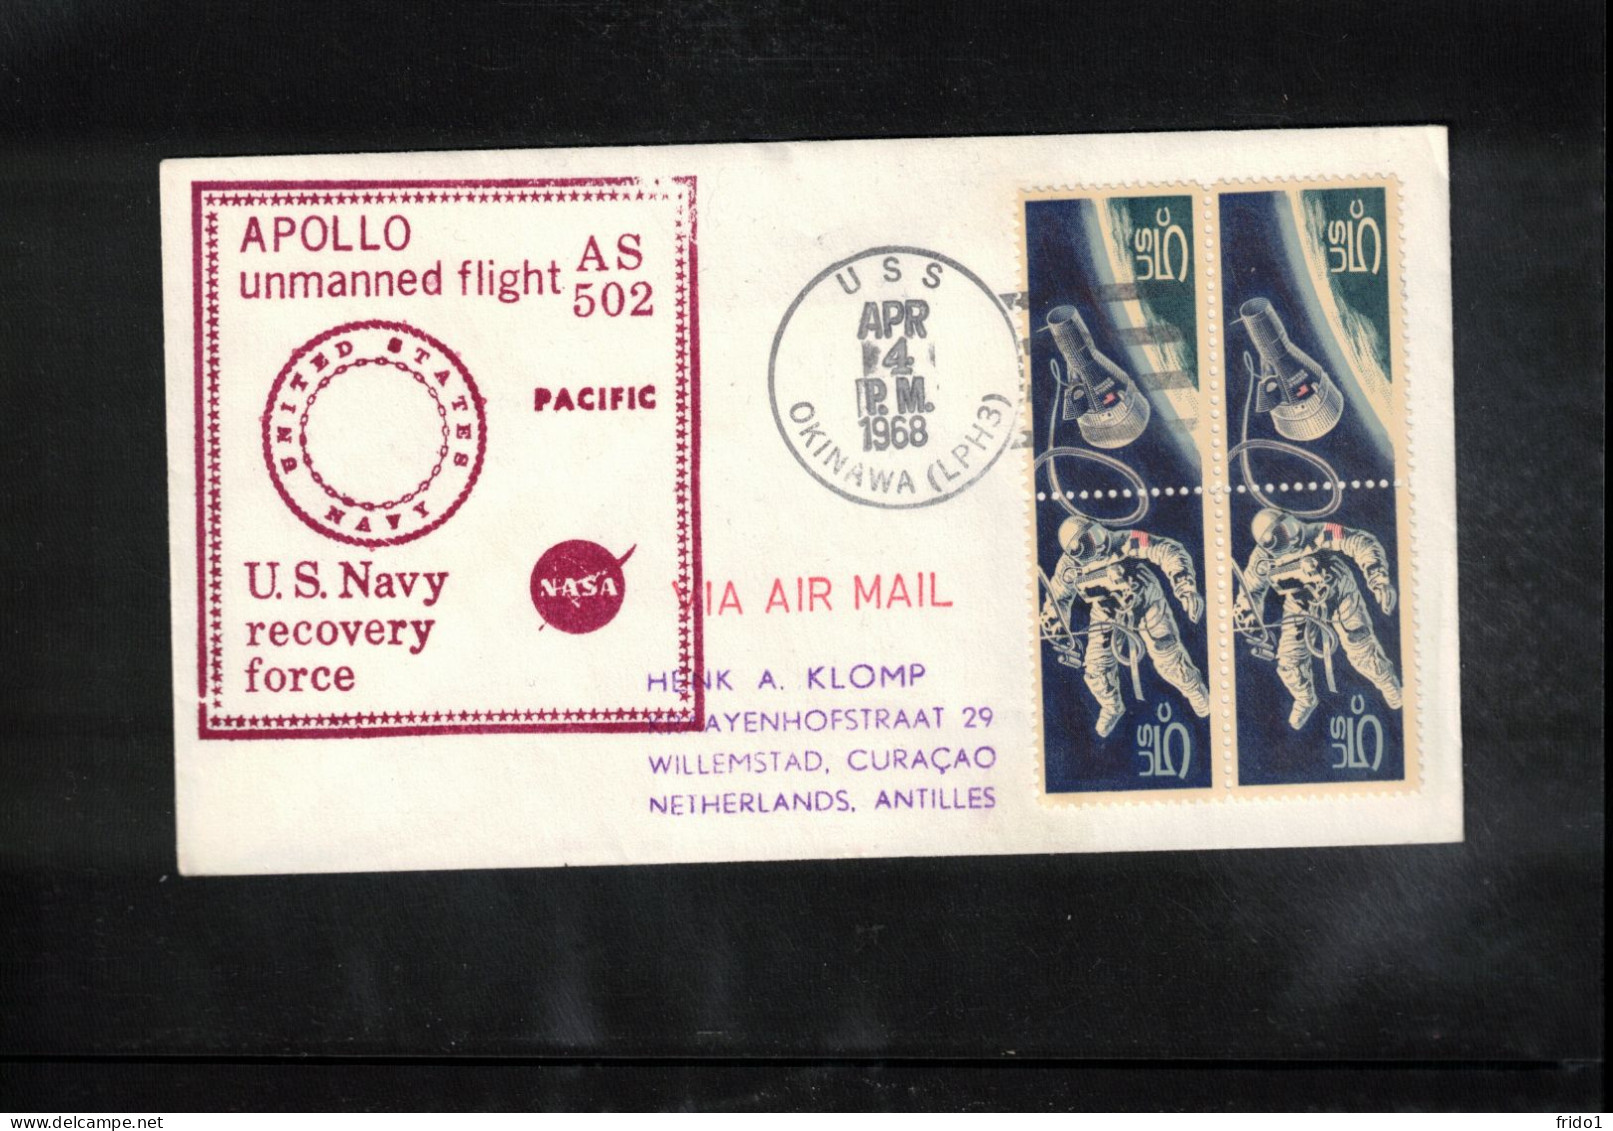 USA 1968 Space / Weltraum Apollo Unmanned Flight AS 502 - US Navy Recovery Force Ship USS Okinawa Interesting Cover - Etats-Unis